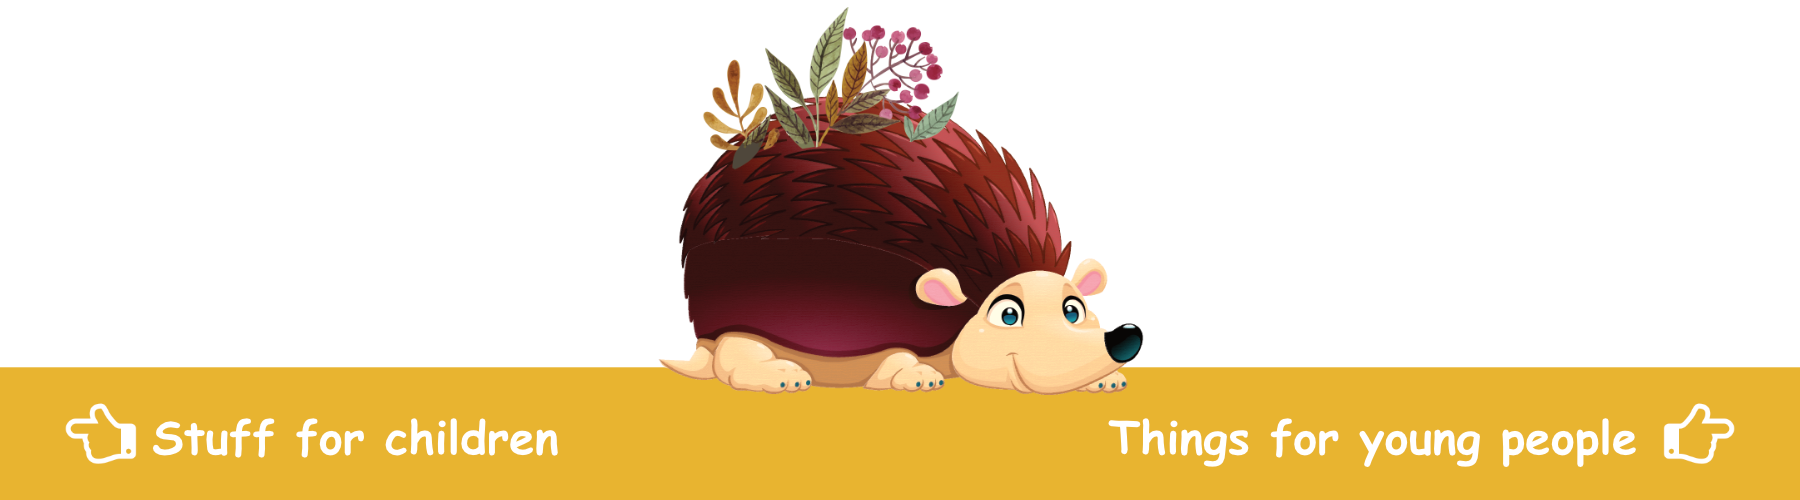 A hedgehog with flowers on its back is laying down on a yellow background.